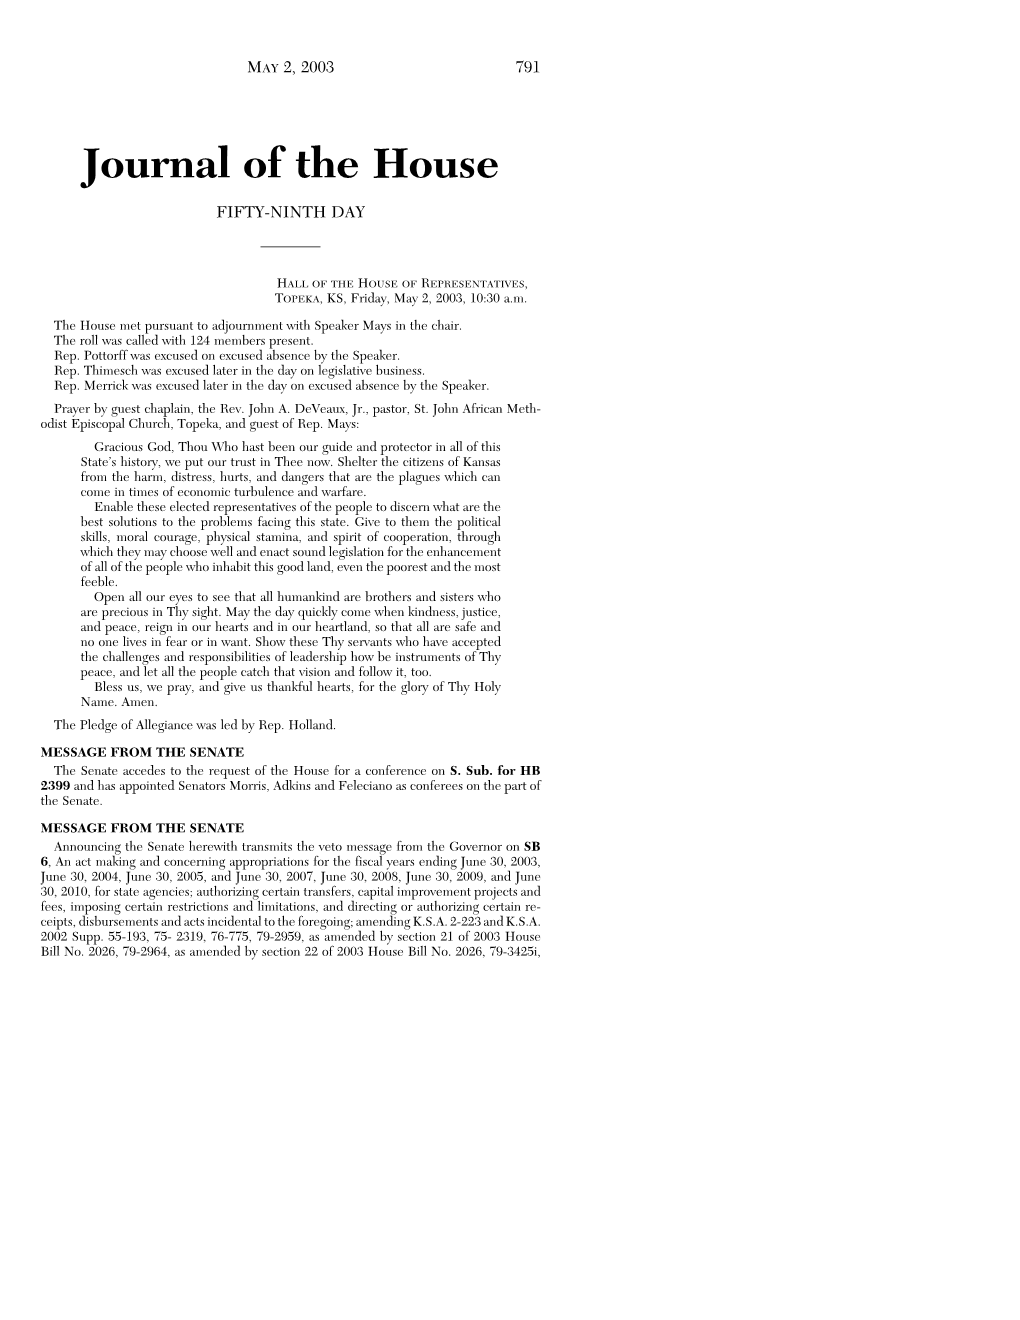 Journal of the House FIFTY-NINTH DAY